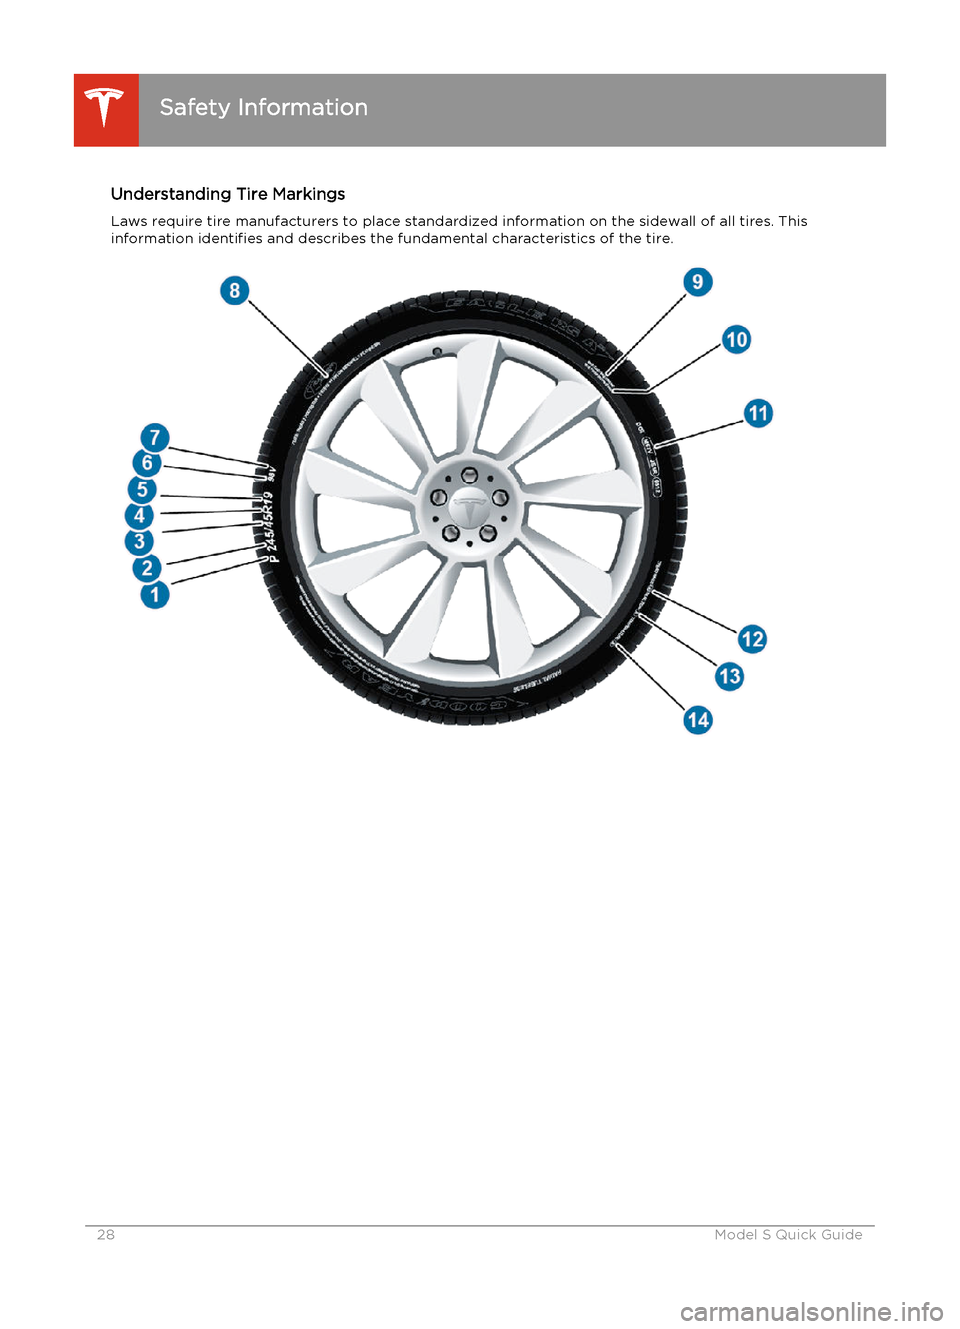 TESLA MODEL S 2014  Quick Guide (Europe) Understanding Tire MarkingsLaws require tire manufacturers to place standardized information on the sidewall of all tires. Thisinformation identifies and describes the fundamental characteristics of t